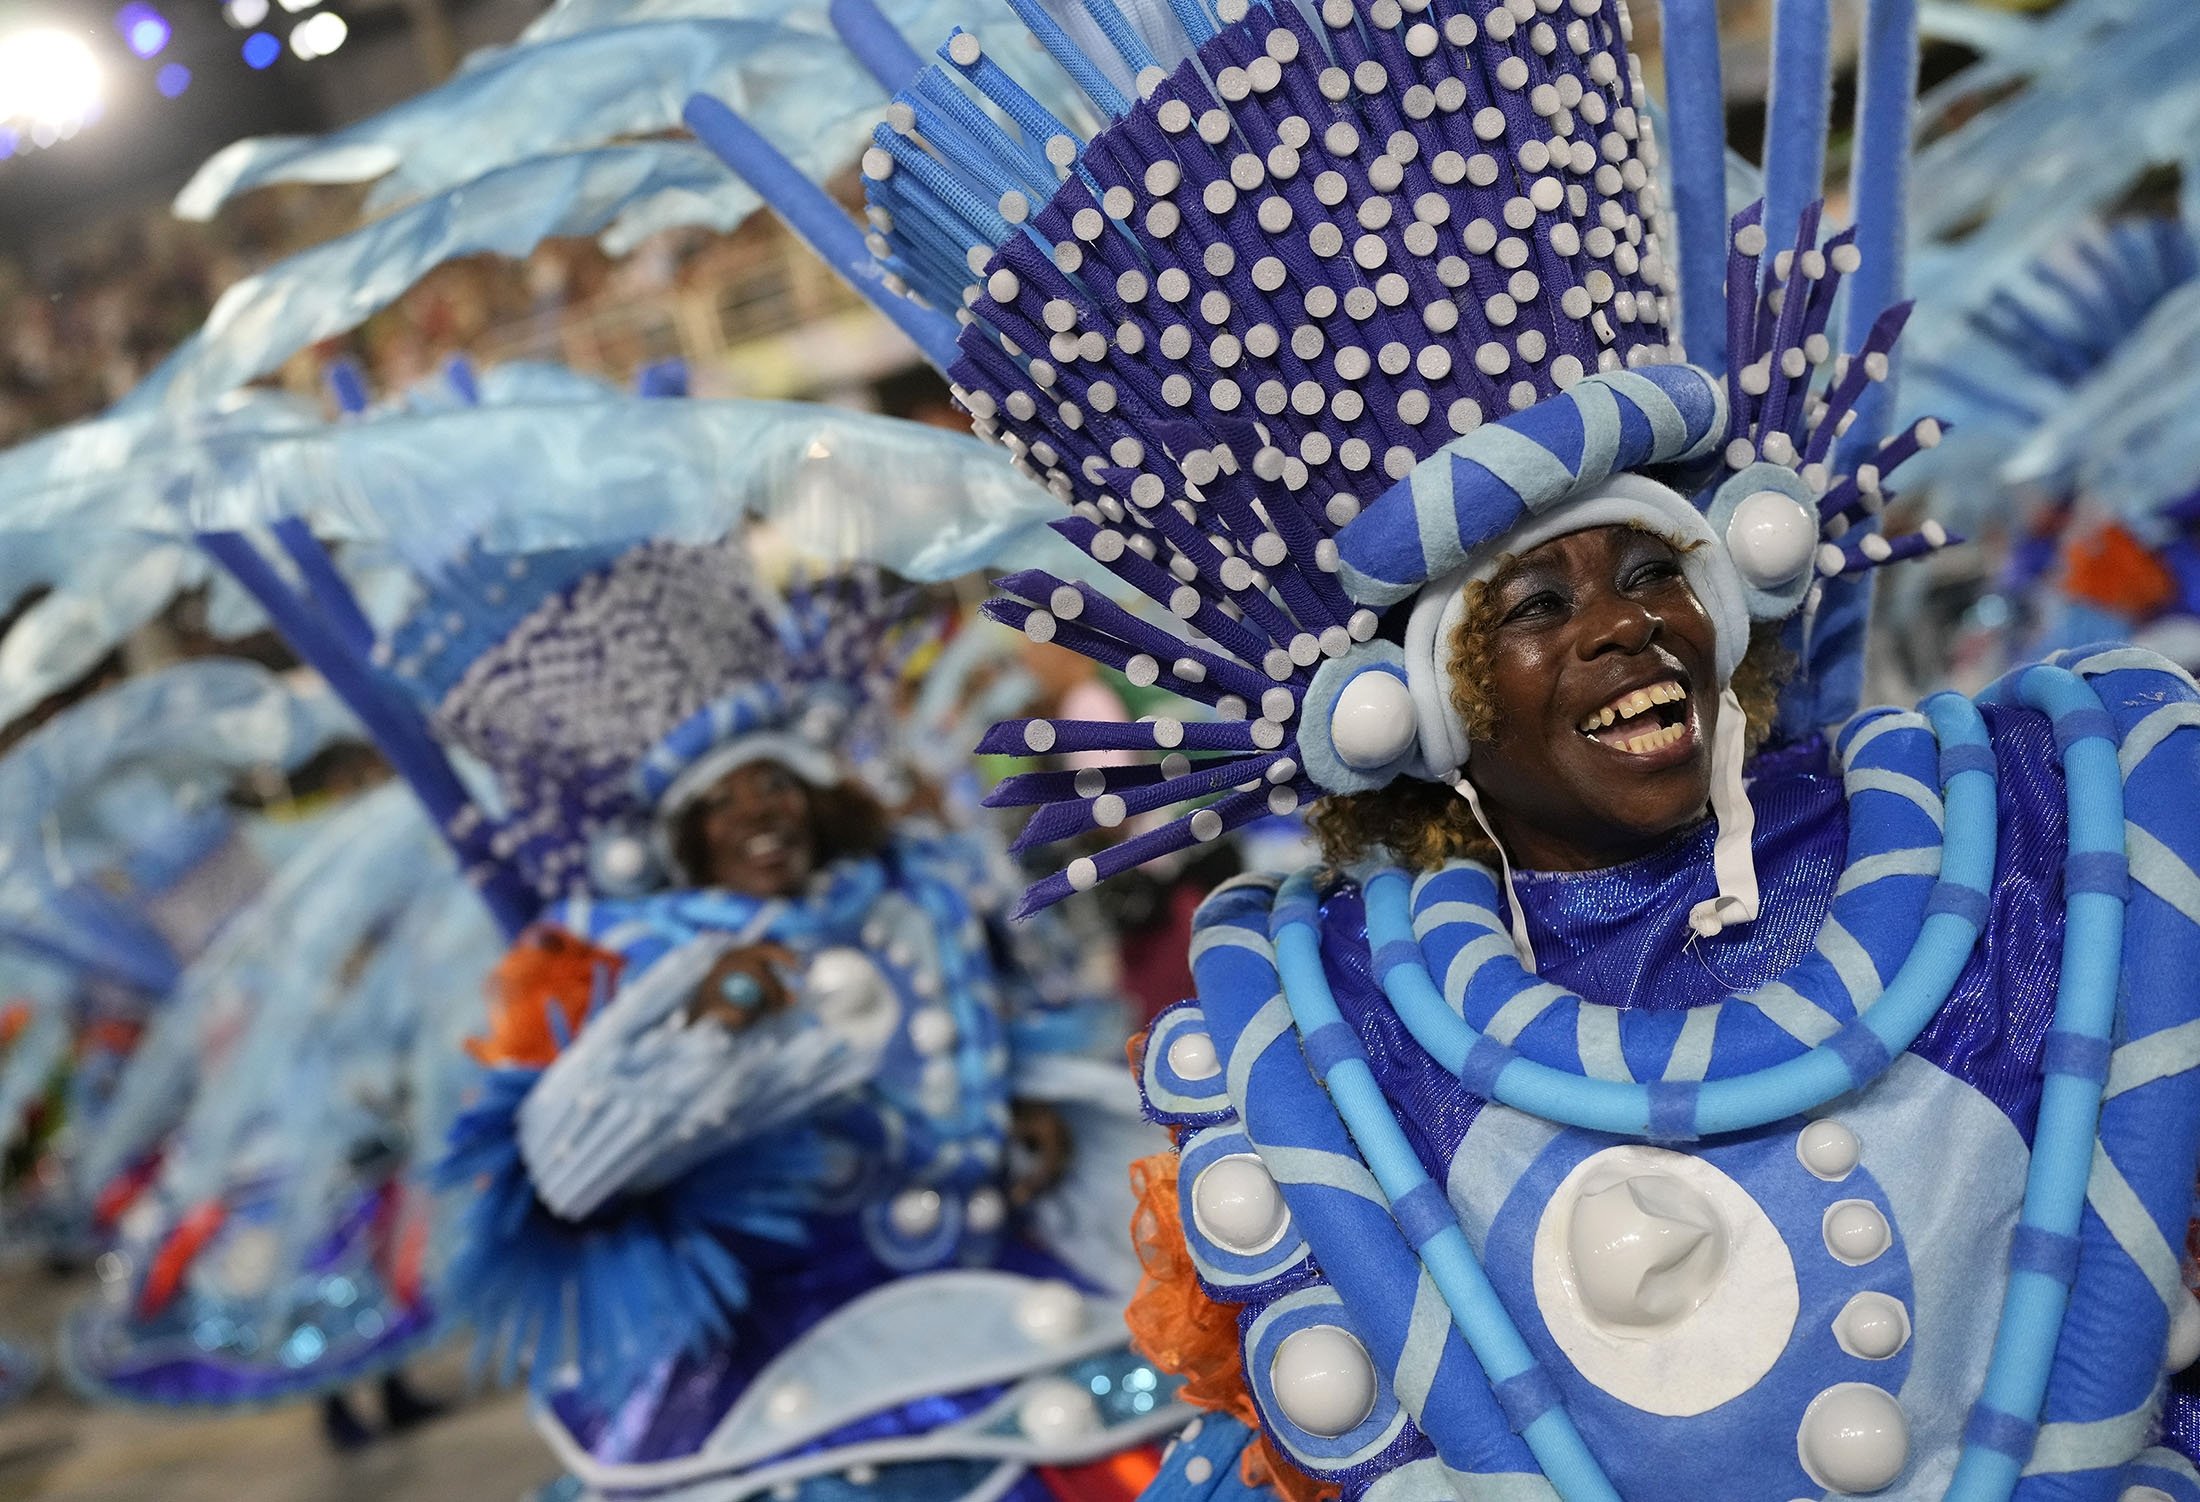 Buy your Costumes for the Brazilian Costume Parade in Rio